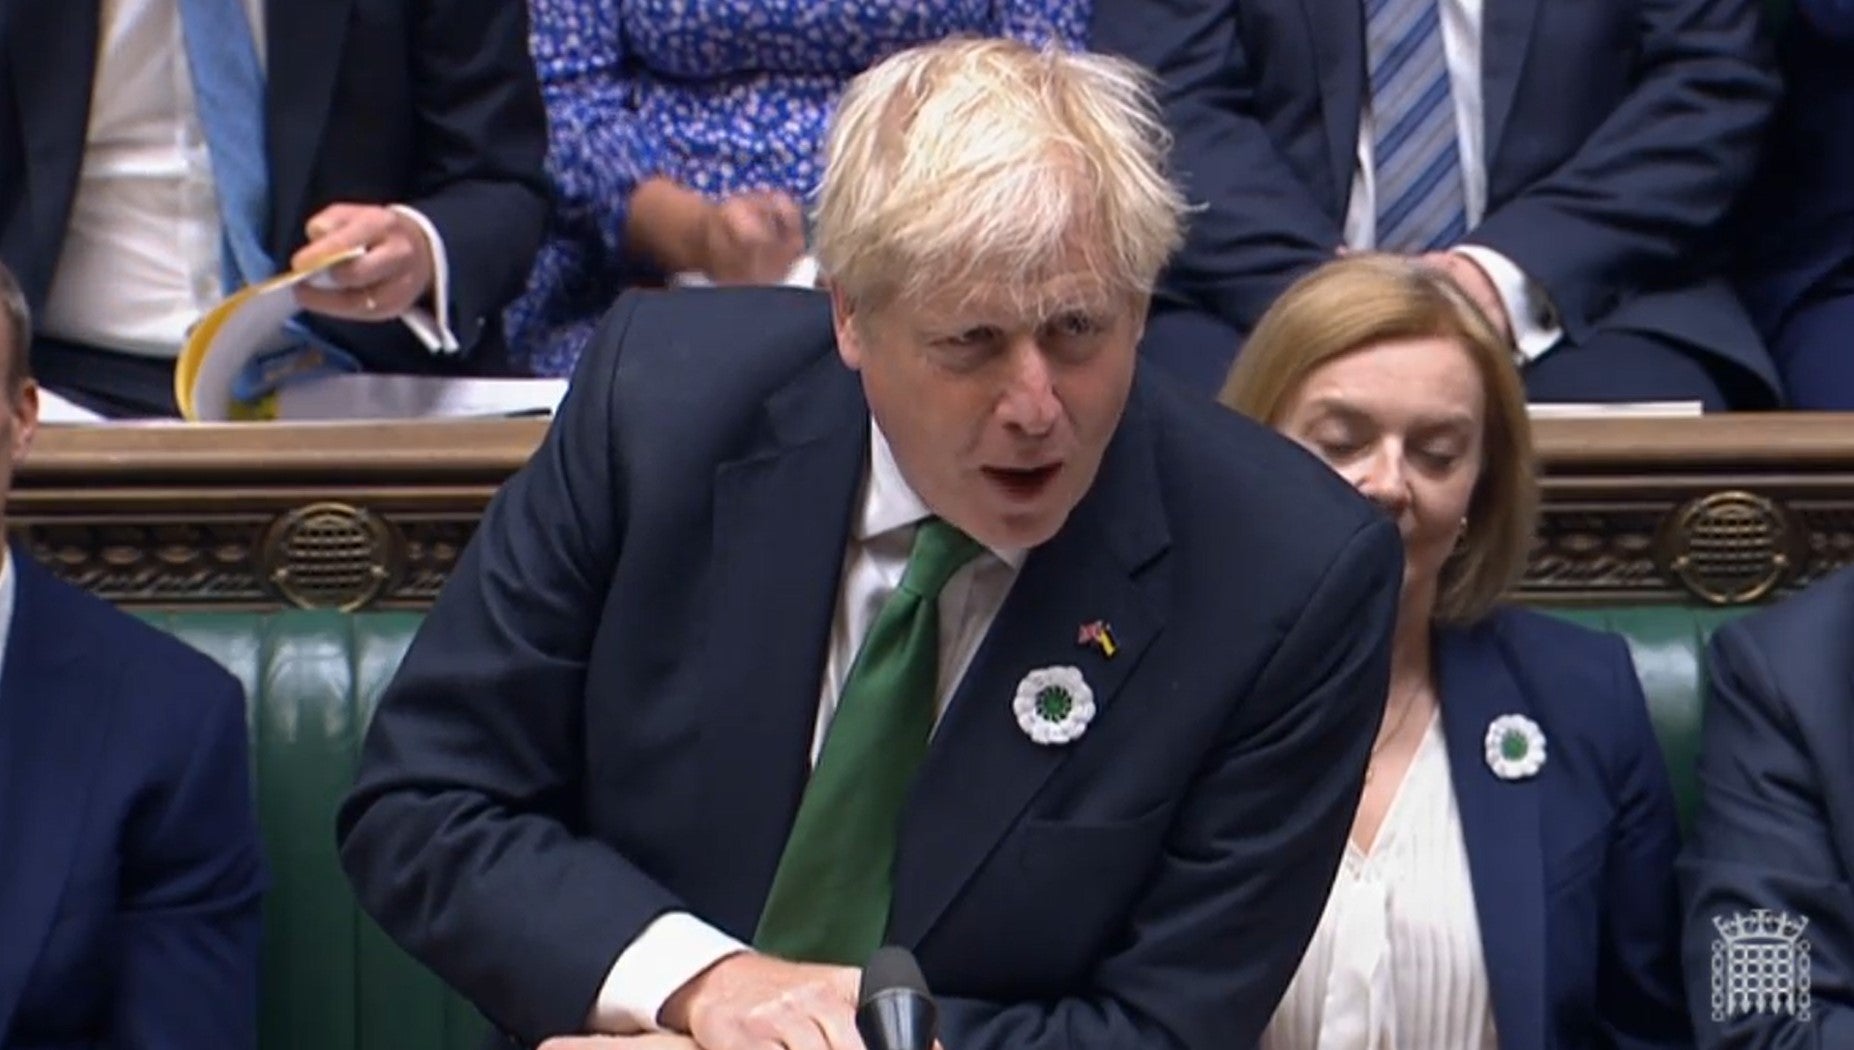 Tricksy to the end: Johnson intends to avoid PMQs next week